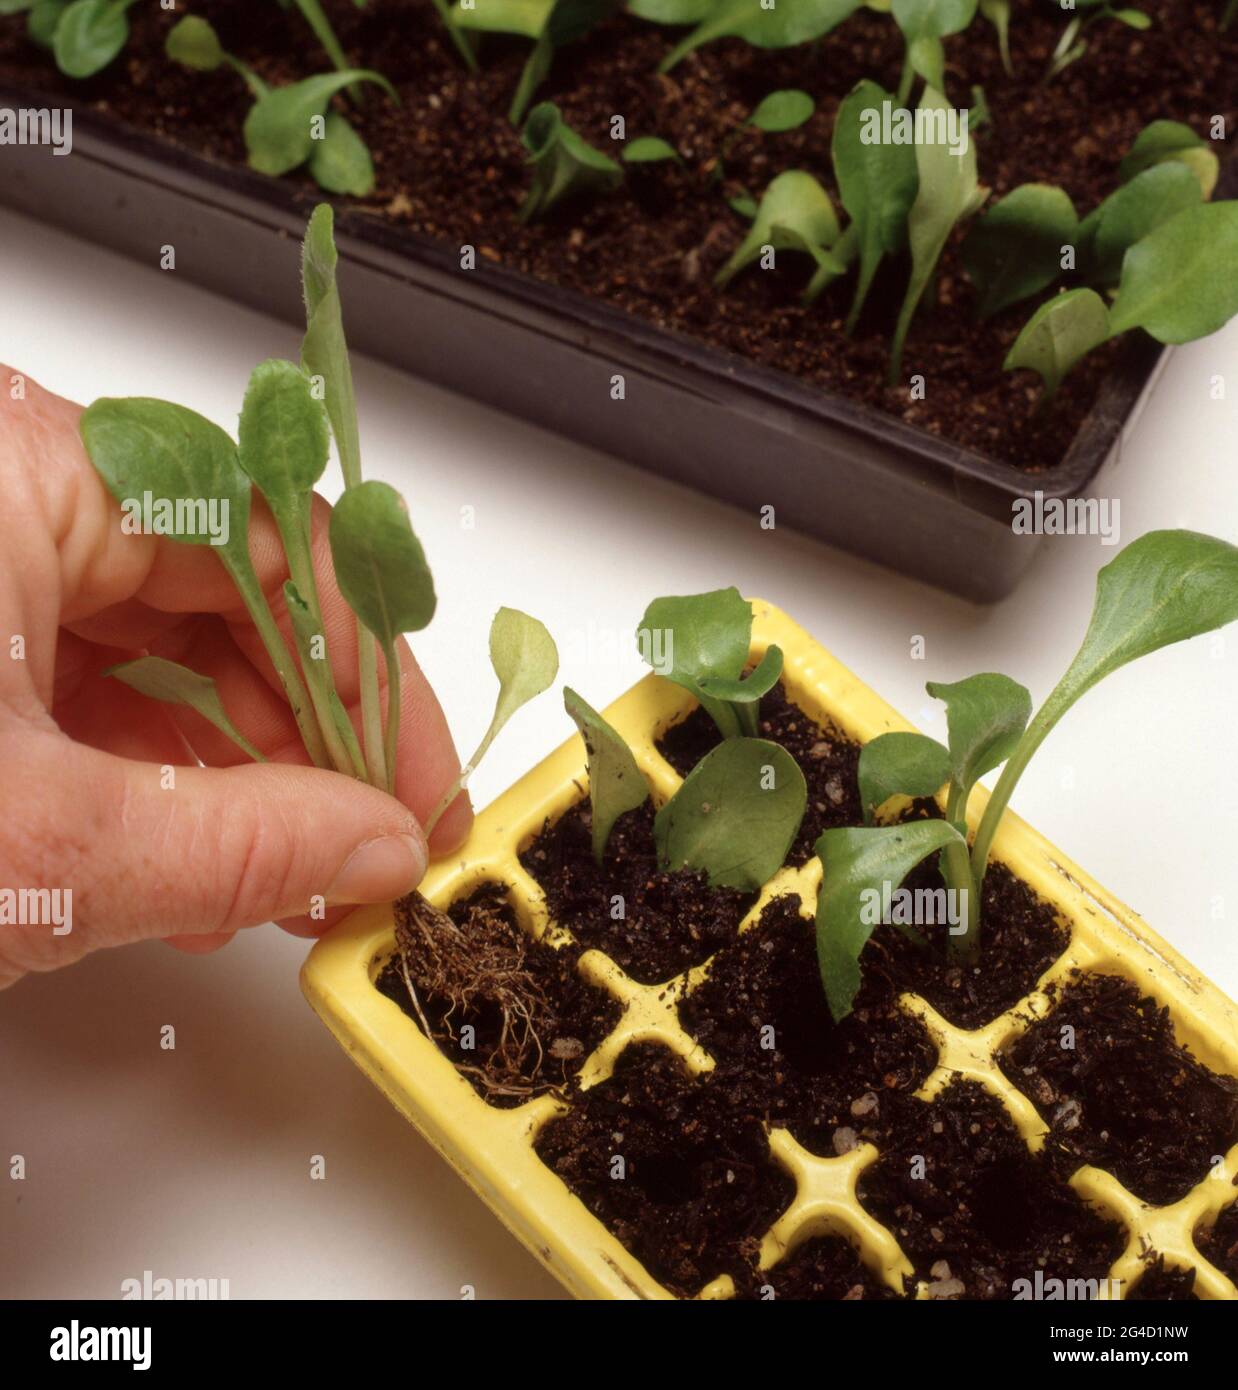 SOWING SEEDS: STEP ELEVEN: TRANSFERRING SEEDLINGS FROM TRAY TO PUNNETS. Stock Photo